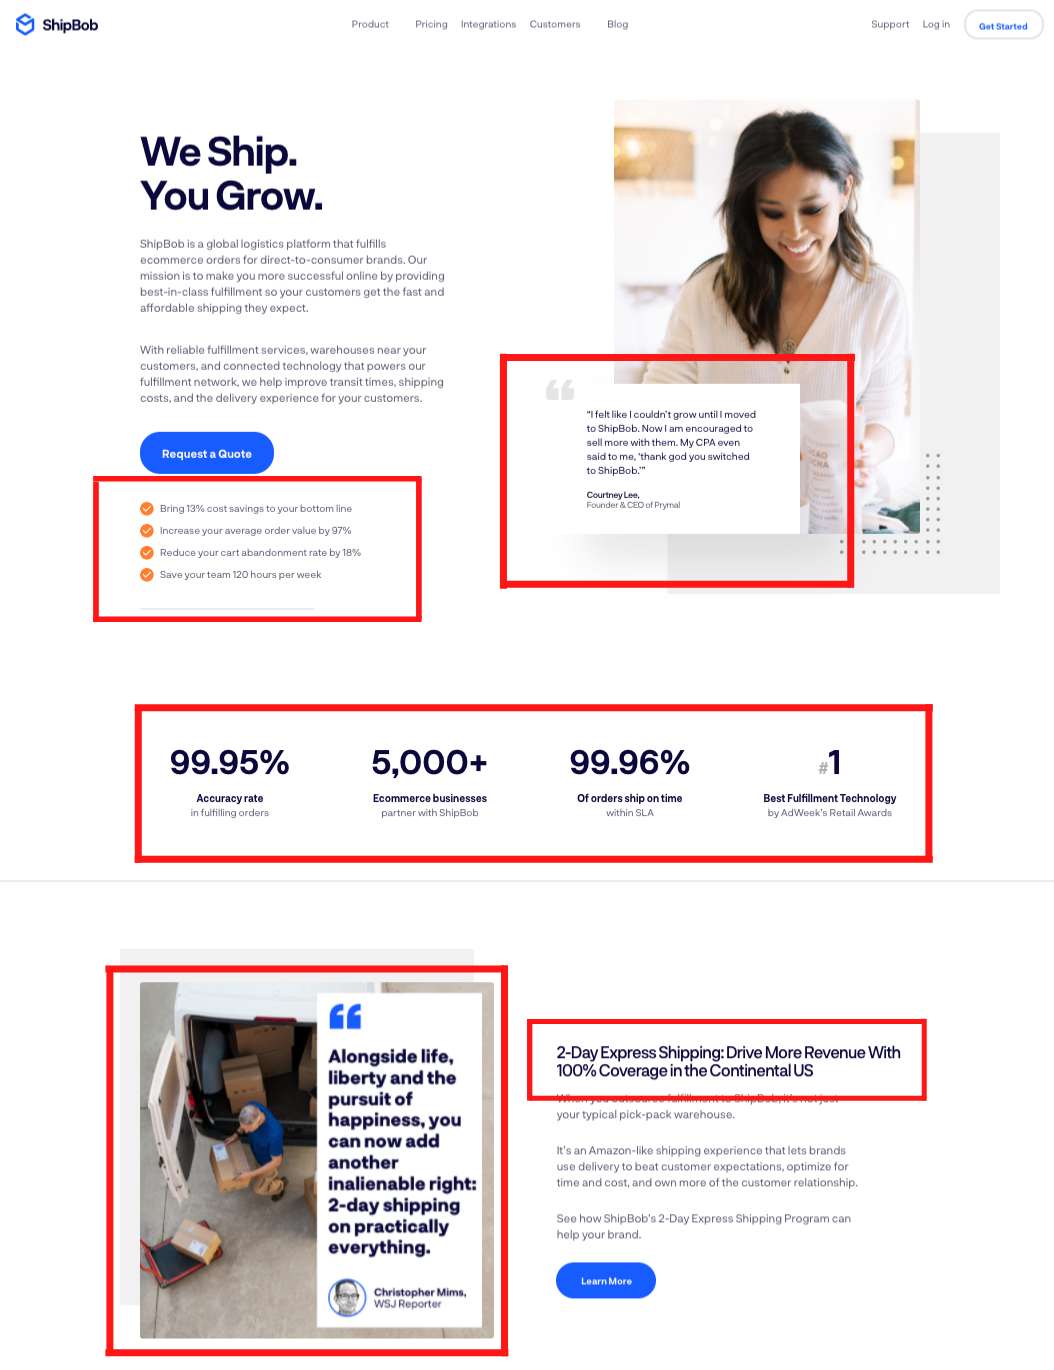 Social Proof on Shipbob Landing Page